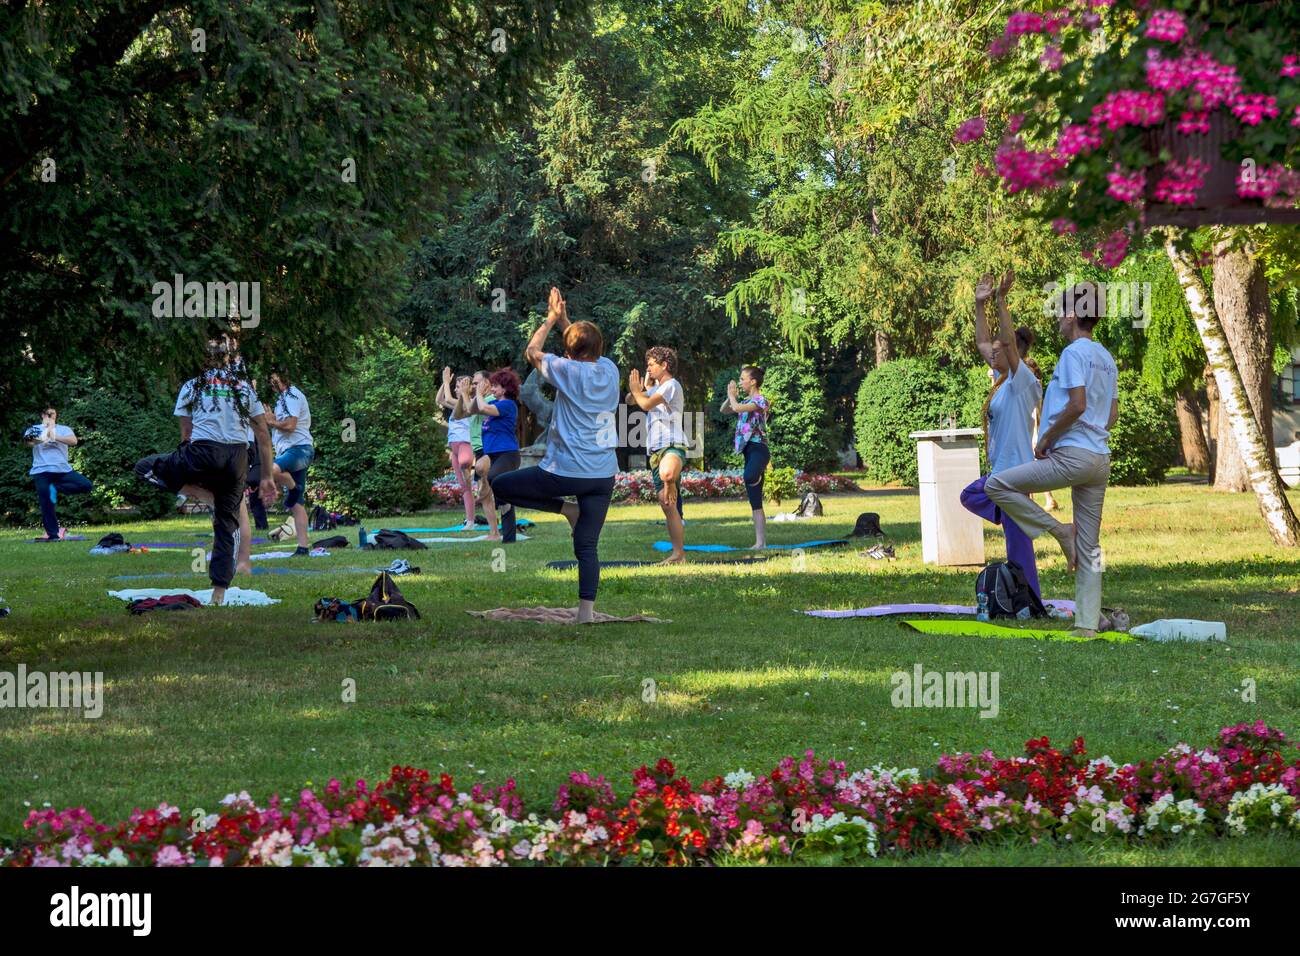 Zrenjanin, Serbia, June 19, 2021. Celebrating World Yoga Day in the city hall park. Yoga is practiced and meditated in nature. This location has tradi Stock Photo